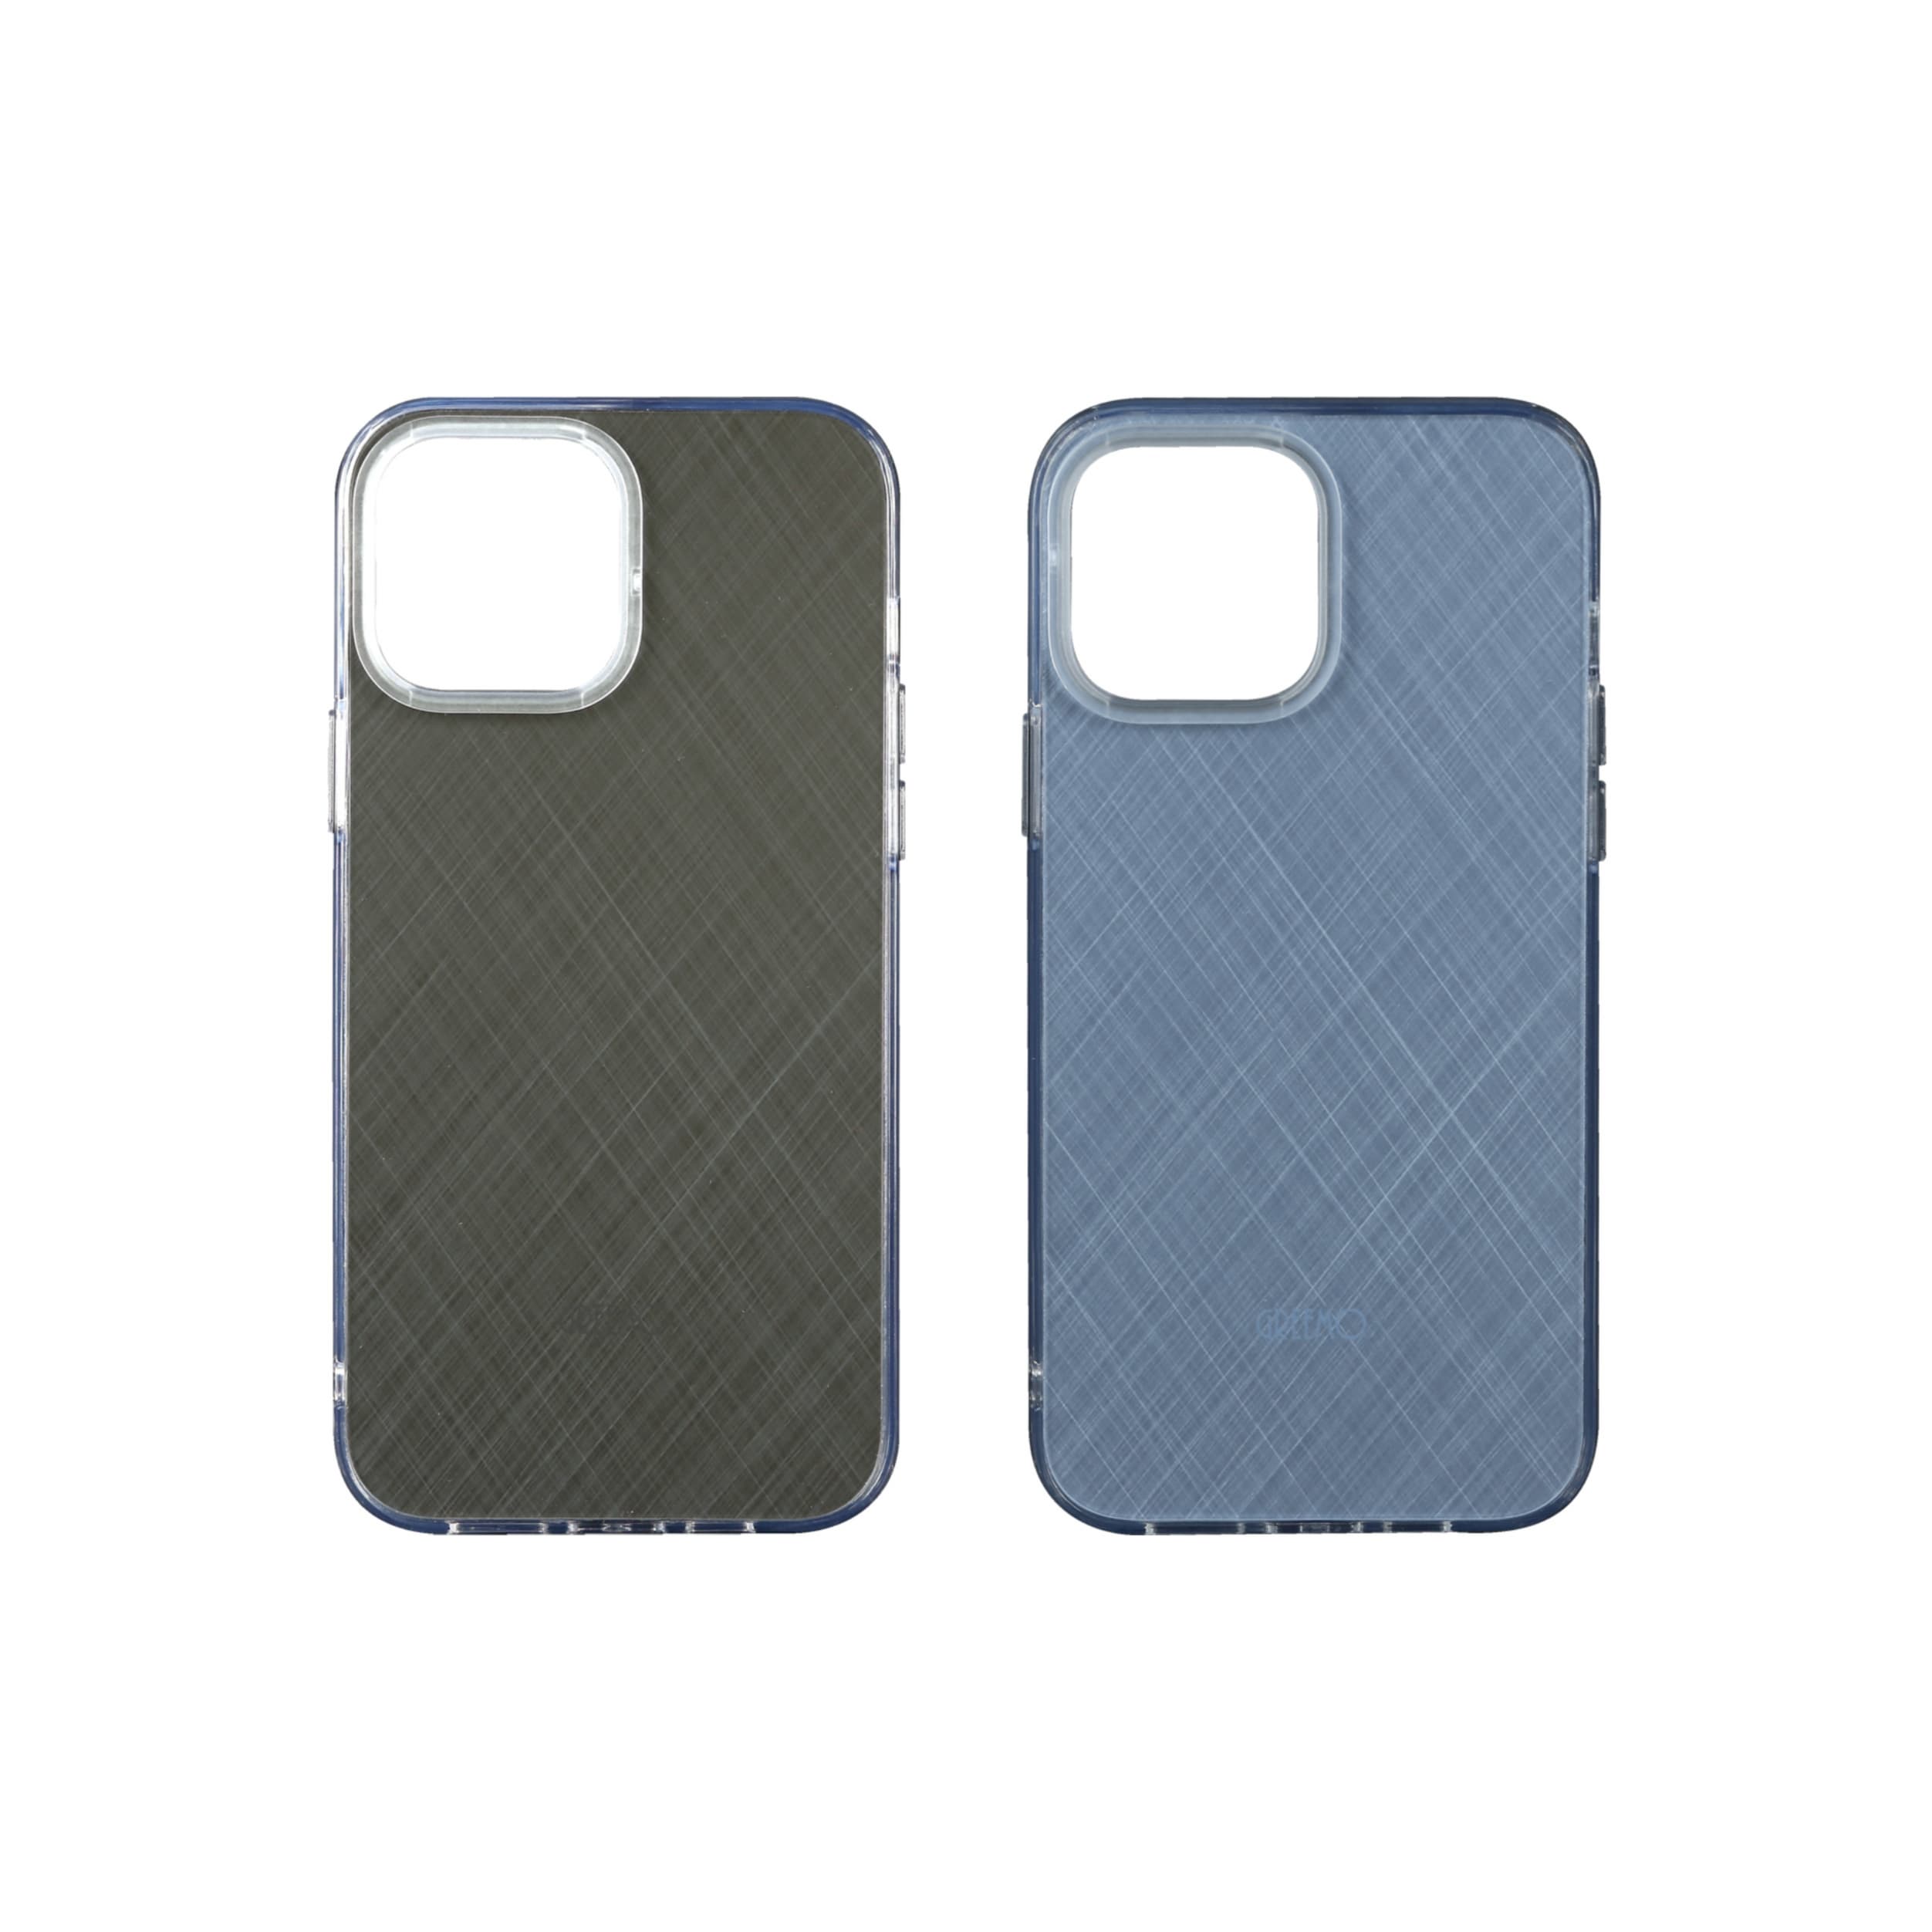 Phone case for iPhone 13 Series